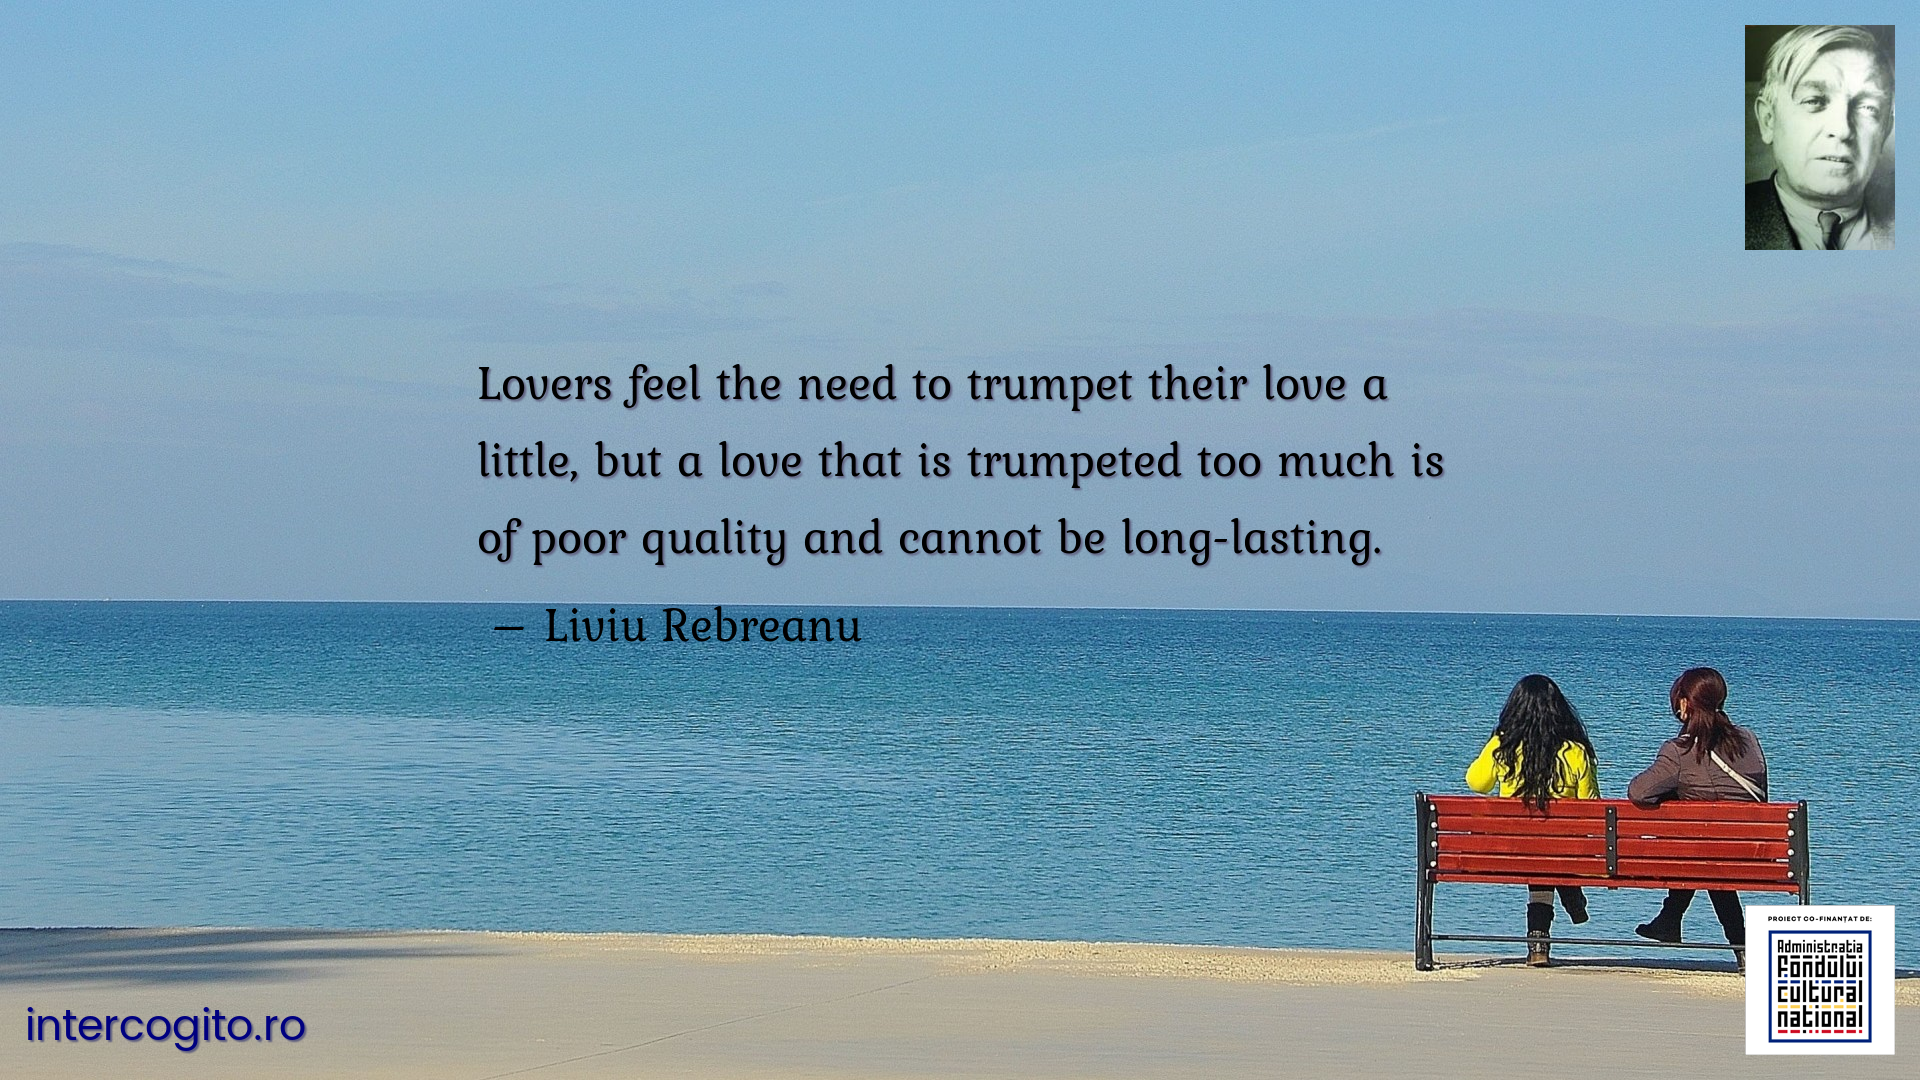 Lovers feel the need to trumpet their love a little, but a love that is trumpeted too much is of poor quality and cannot be long-lasting.